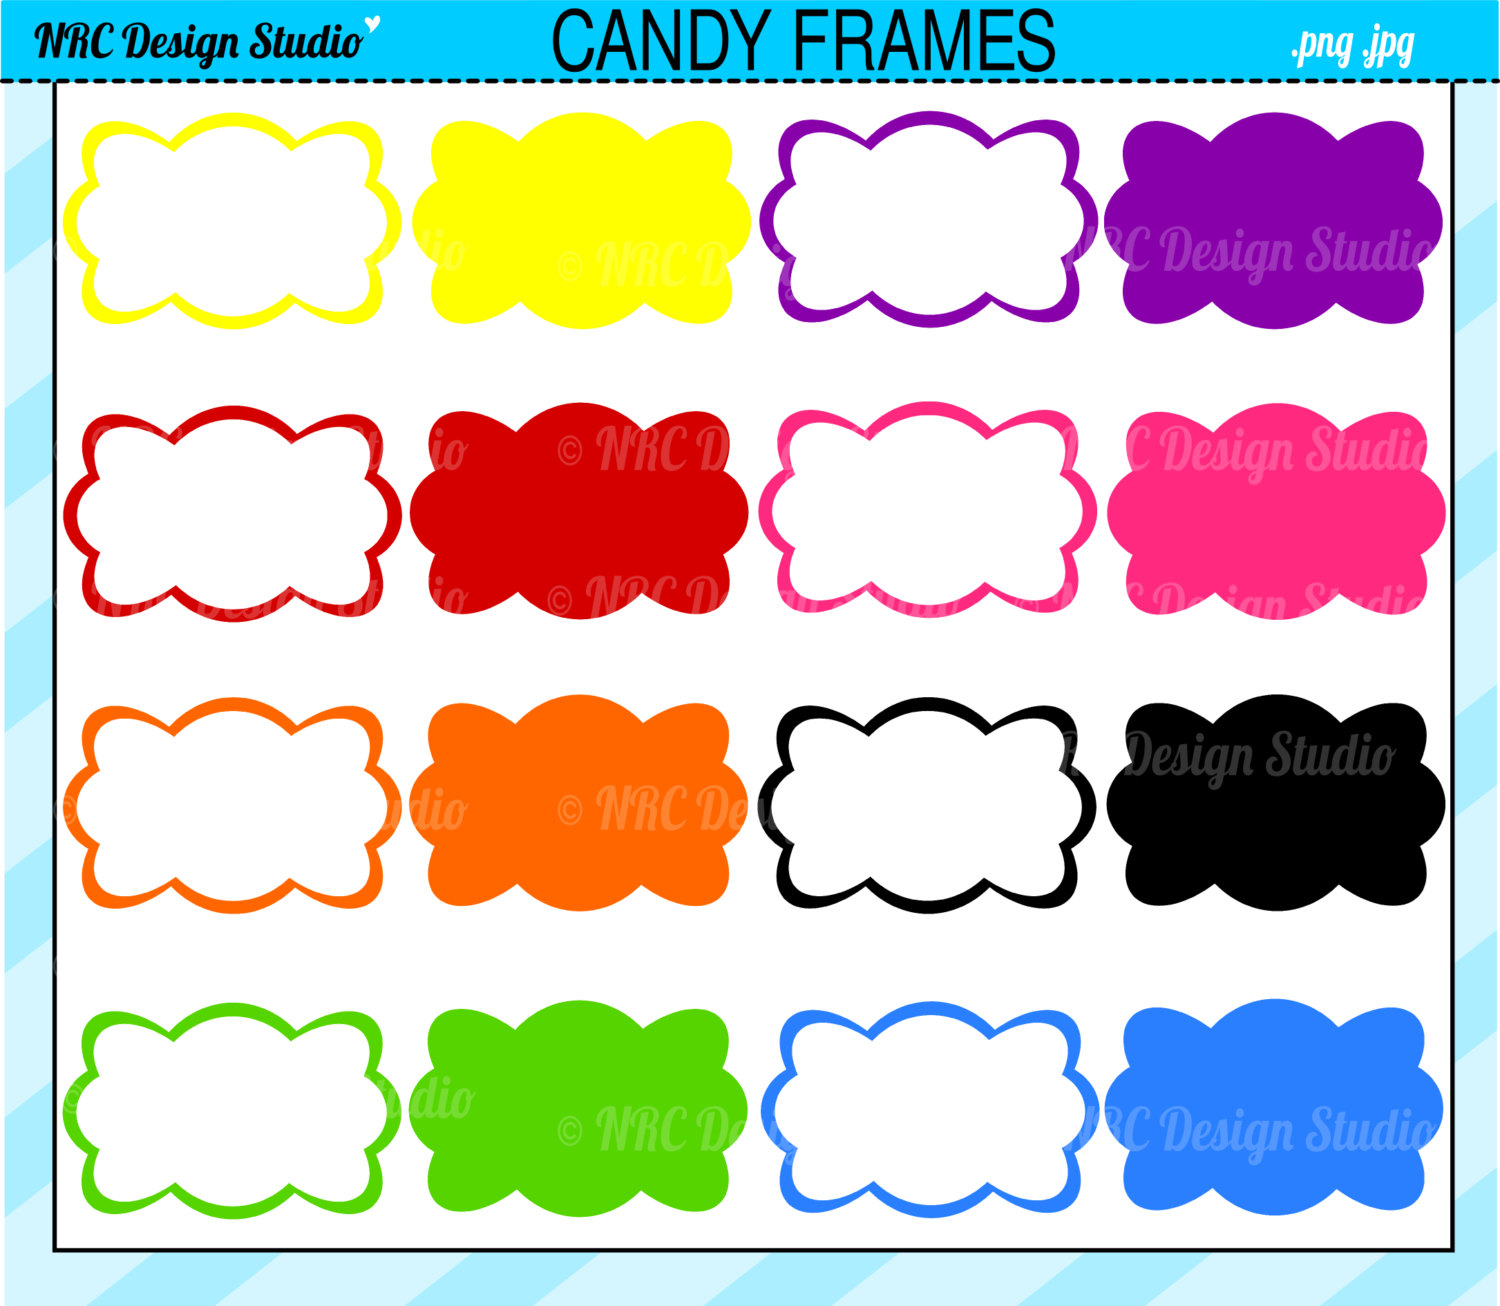 Popular items for colorful frames on Etsy